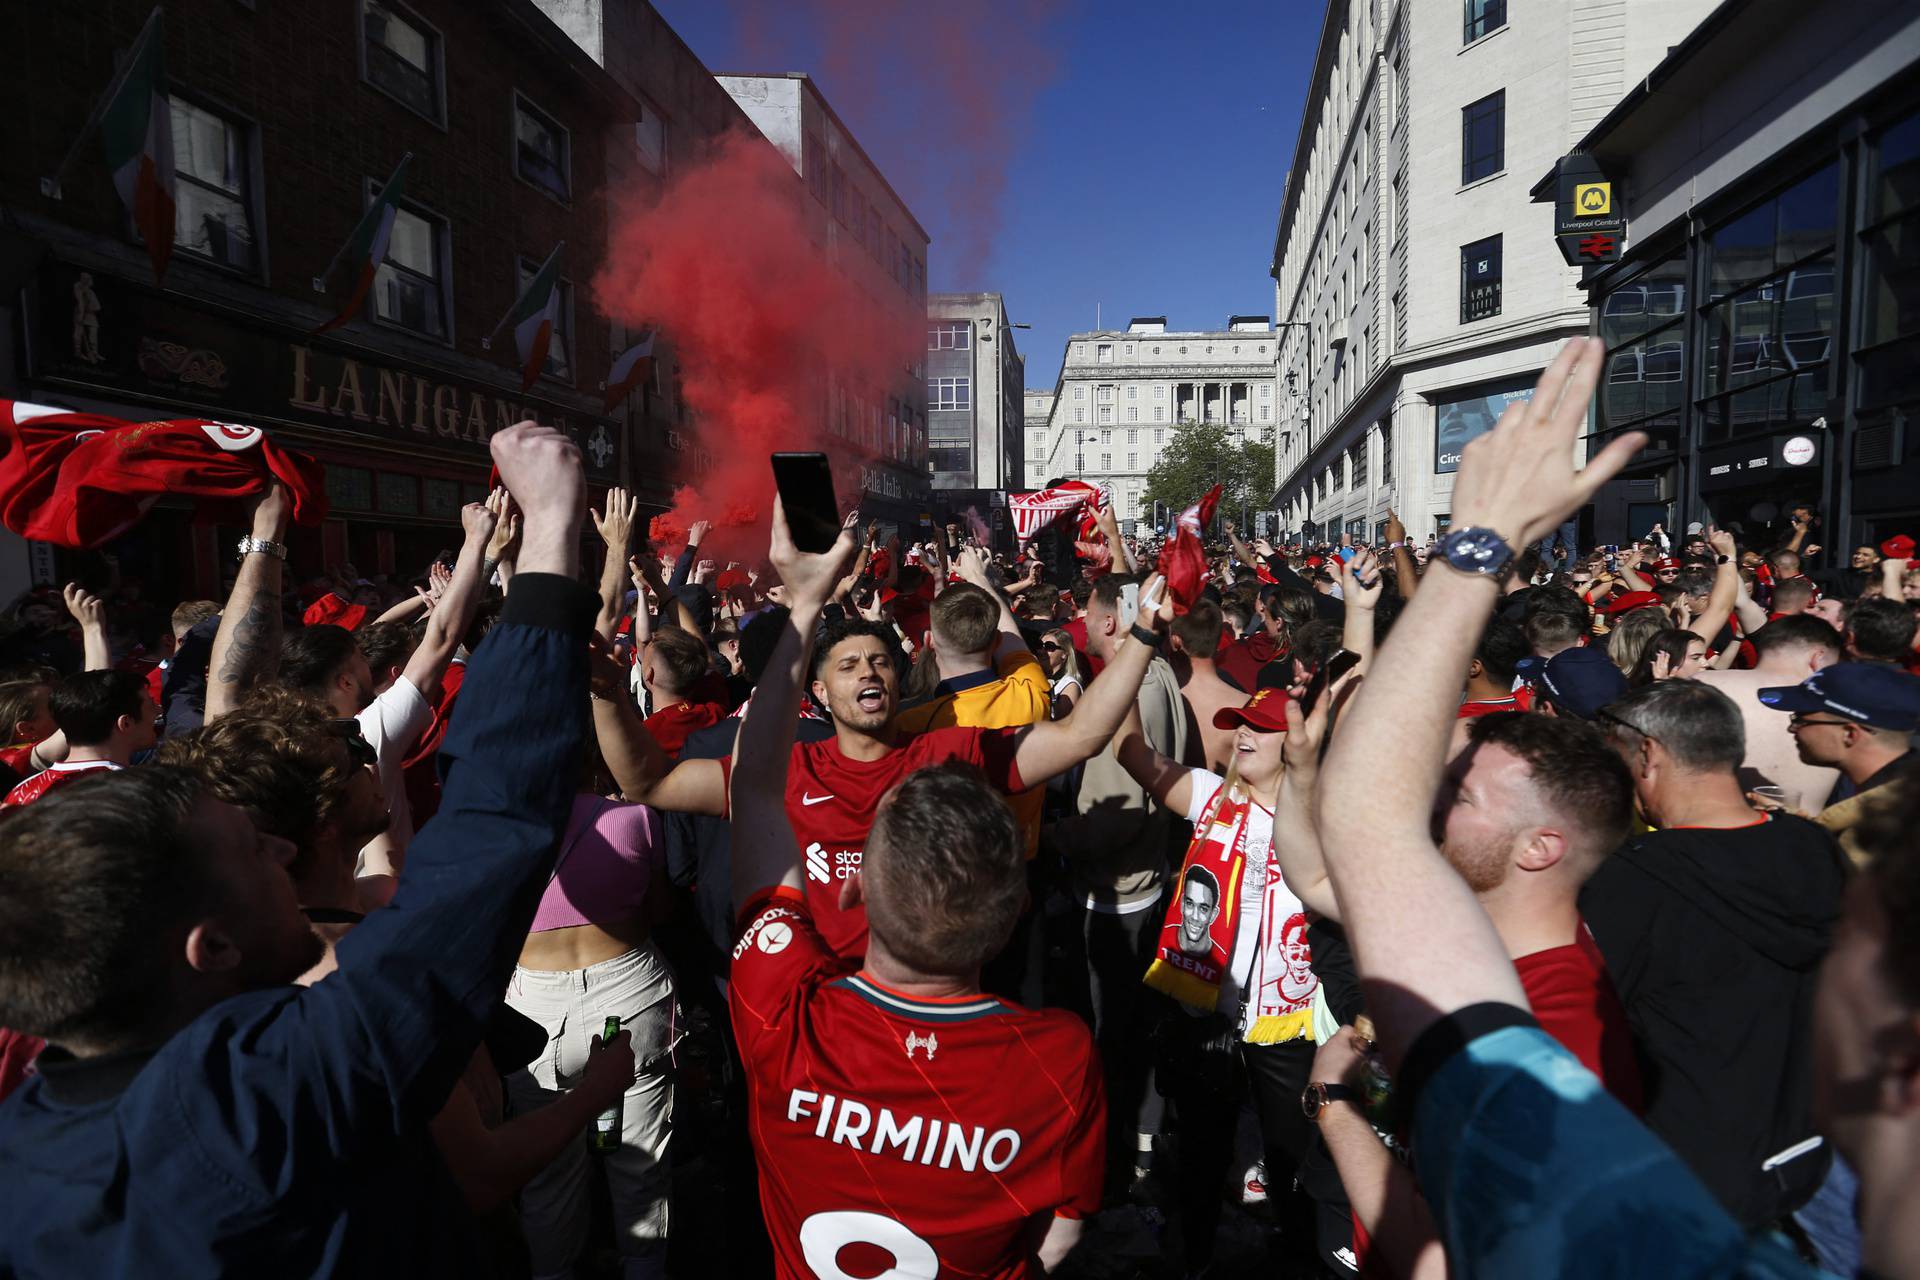 Fans gather in Liverpool for the Champions League Final - Liverpool v Real Madrid